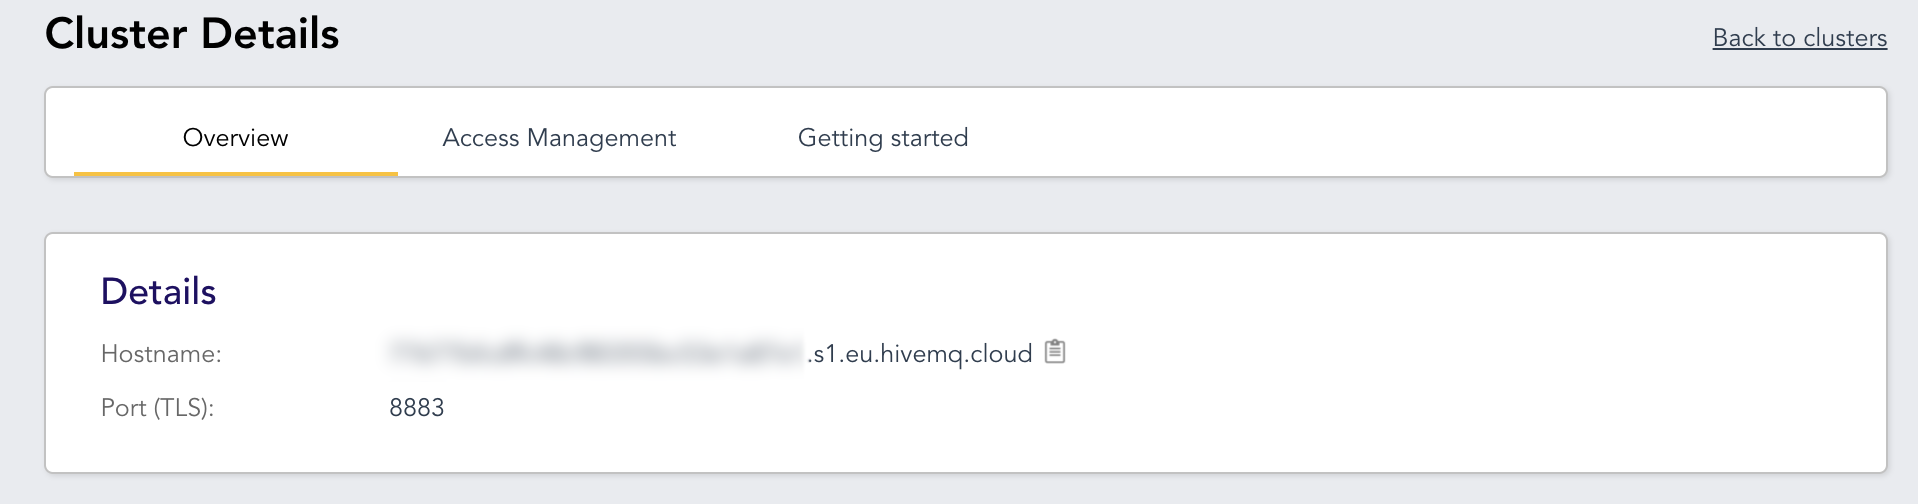 HiveMQ Cloud Cluster Overview